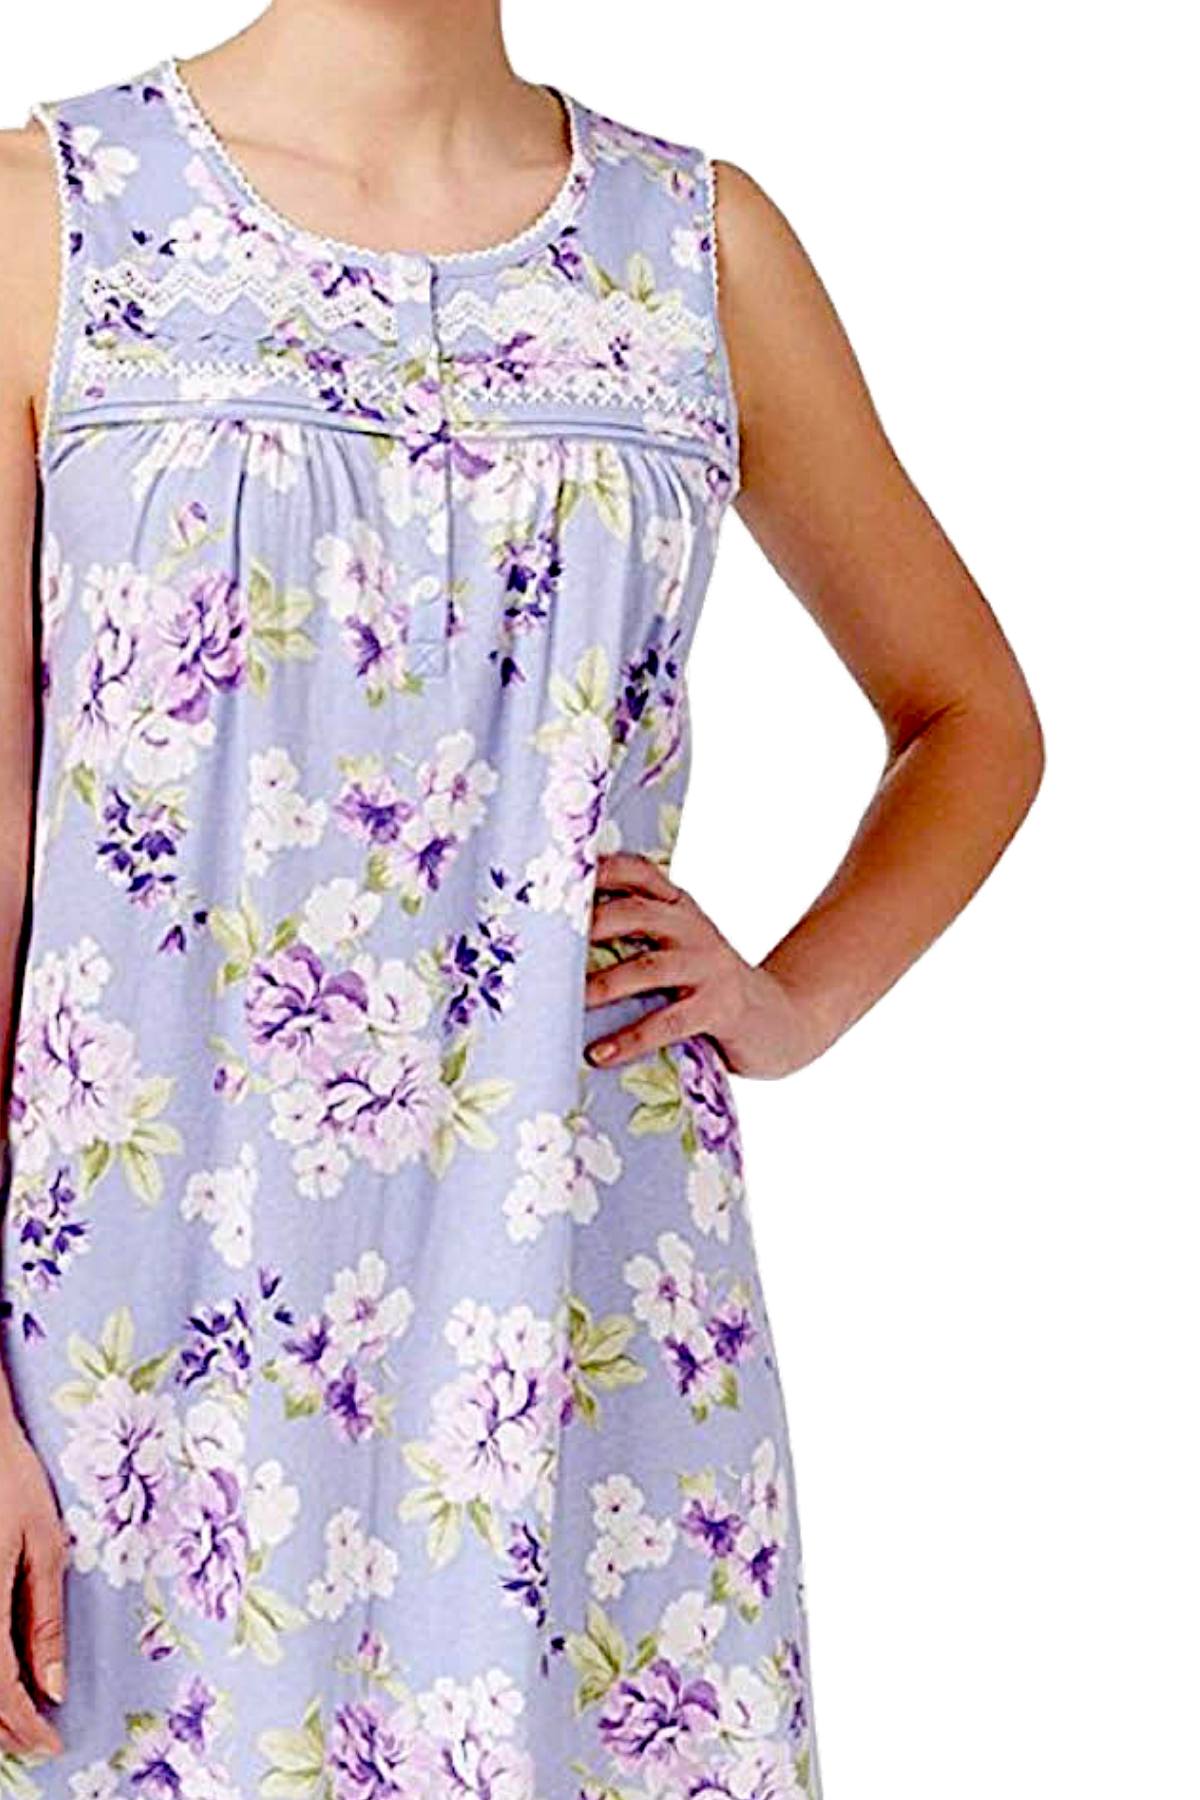 Charter Club Intimates Purple Floral Lace-Trimmed Embroidered Night Gown